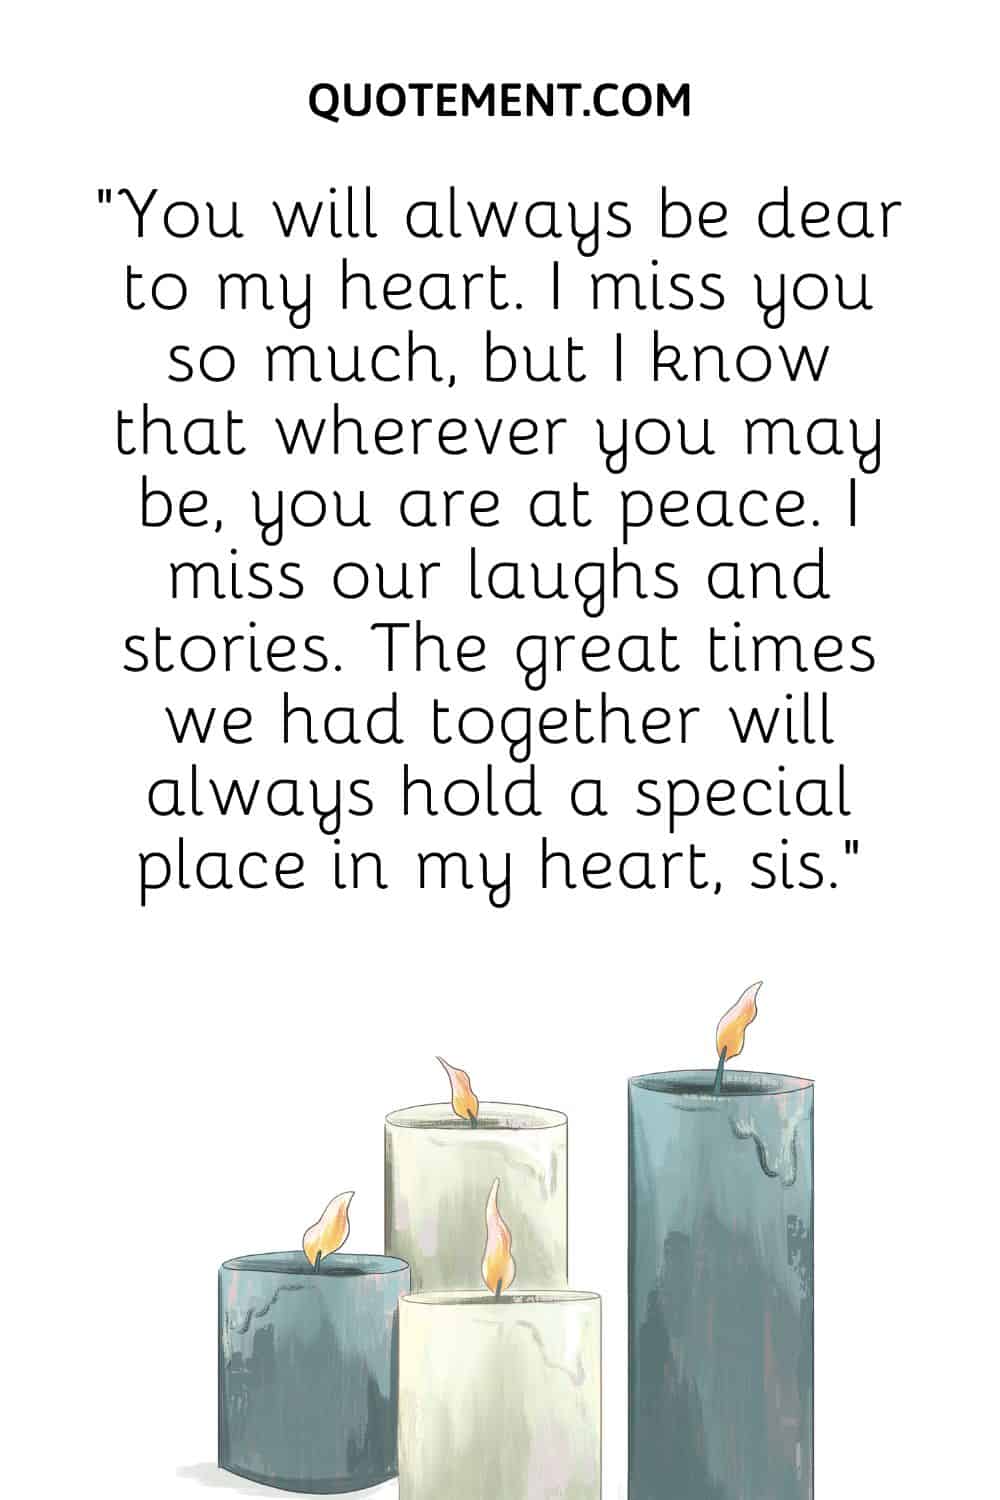 “You will always be dear to my heart. I miss you so much, but I know that wherever you may be, you are at peace.